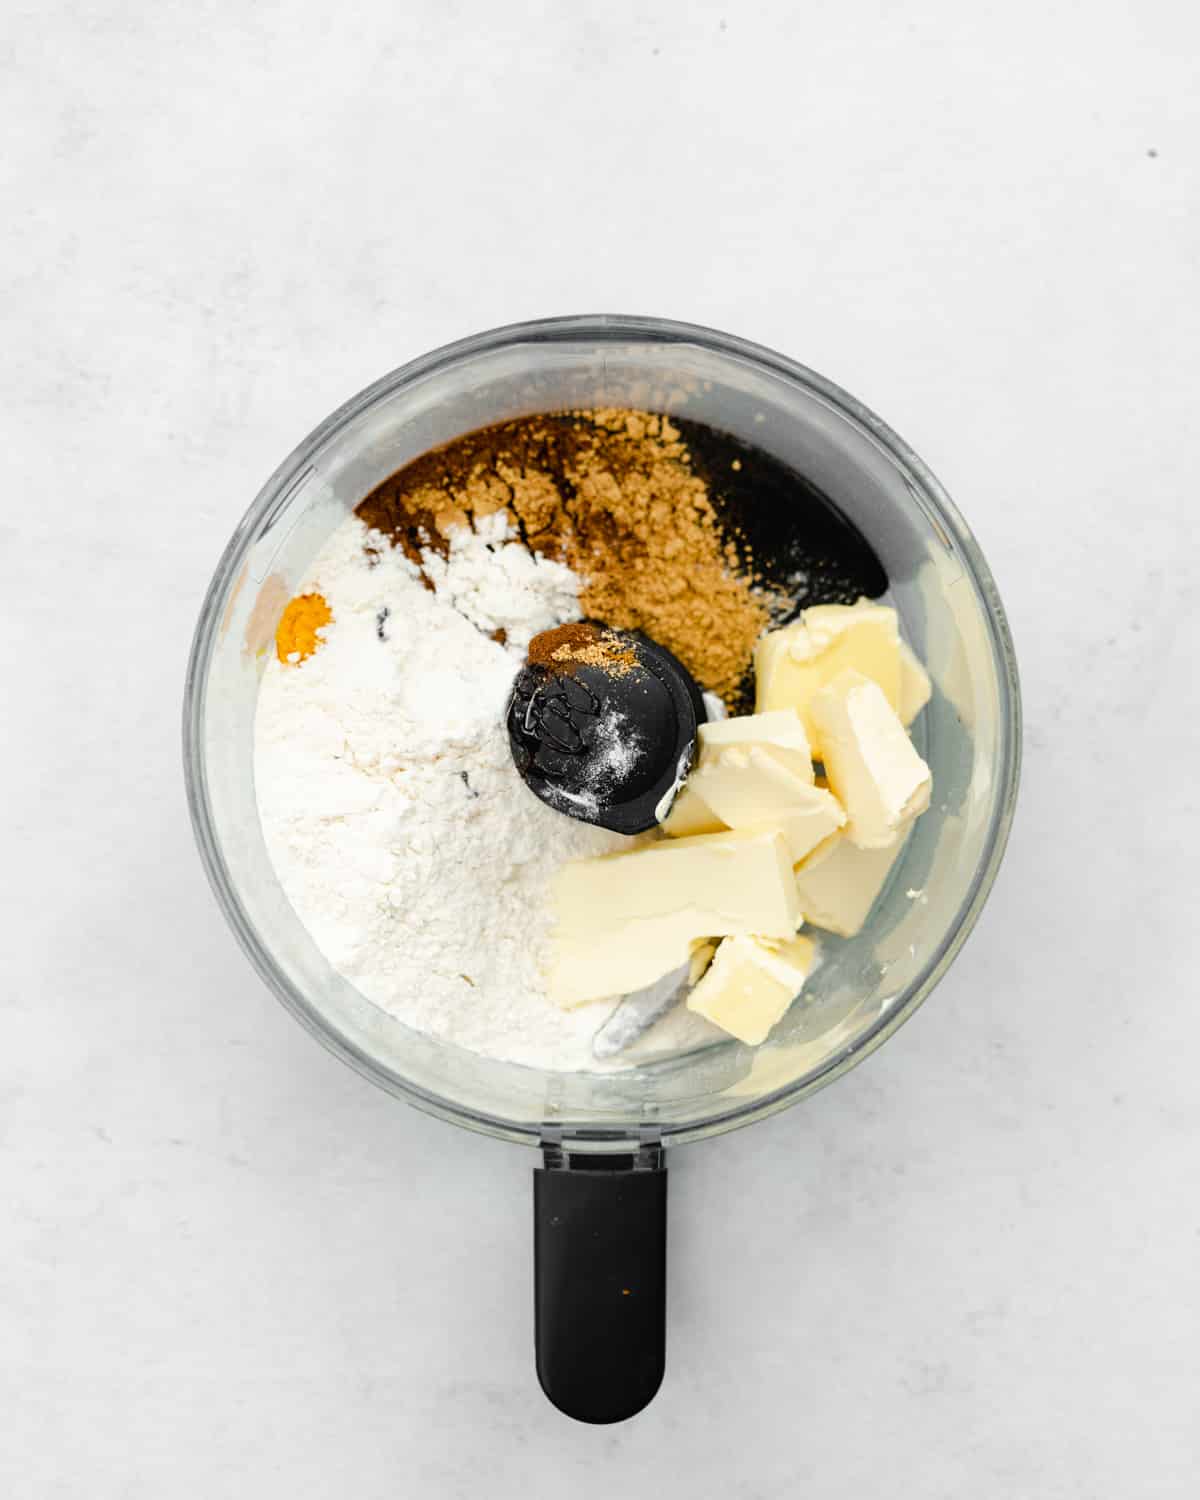 butter, flour, sugar and spices in a food processor.